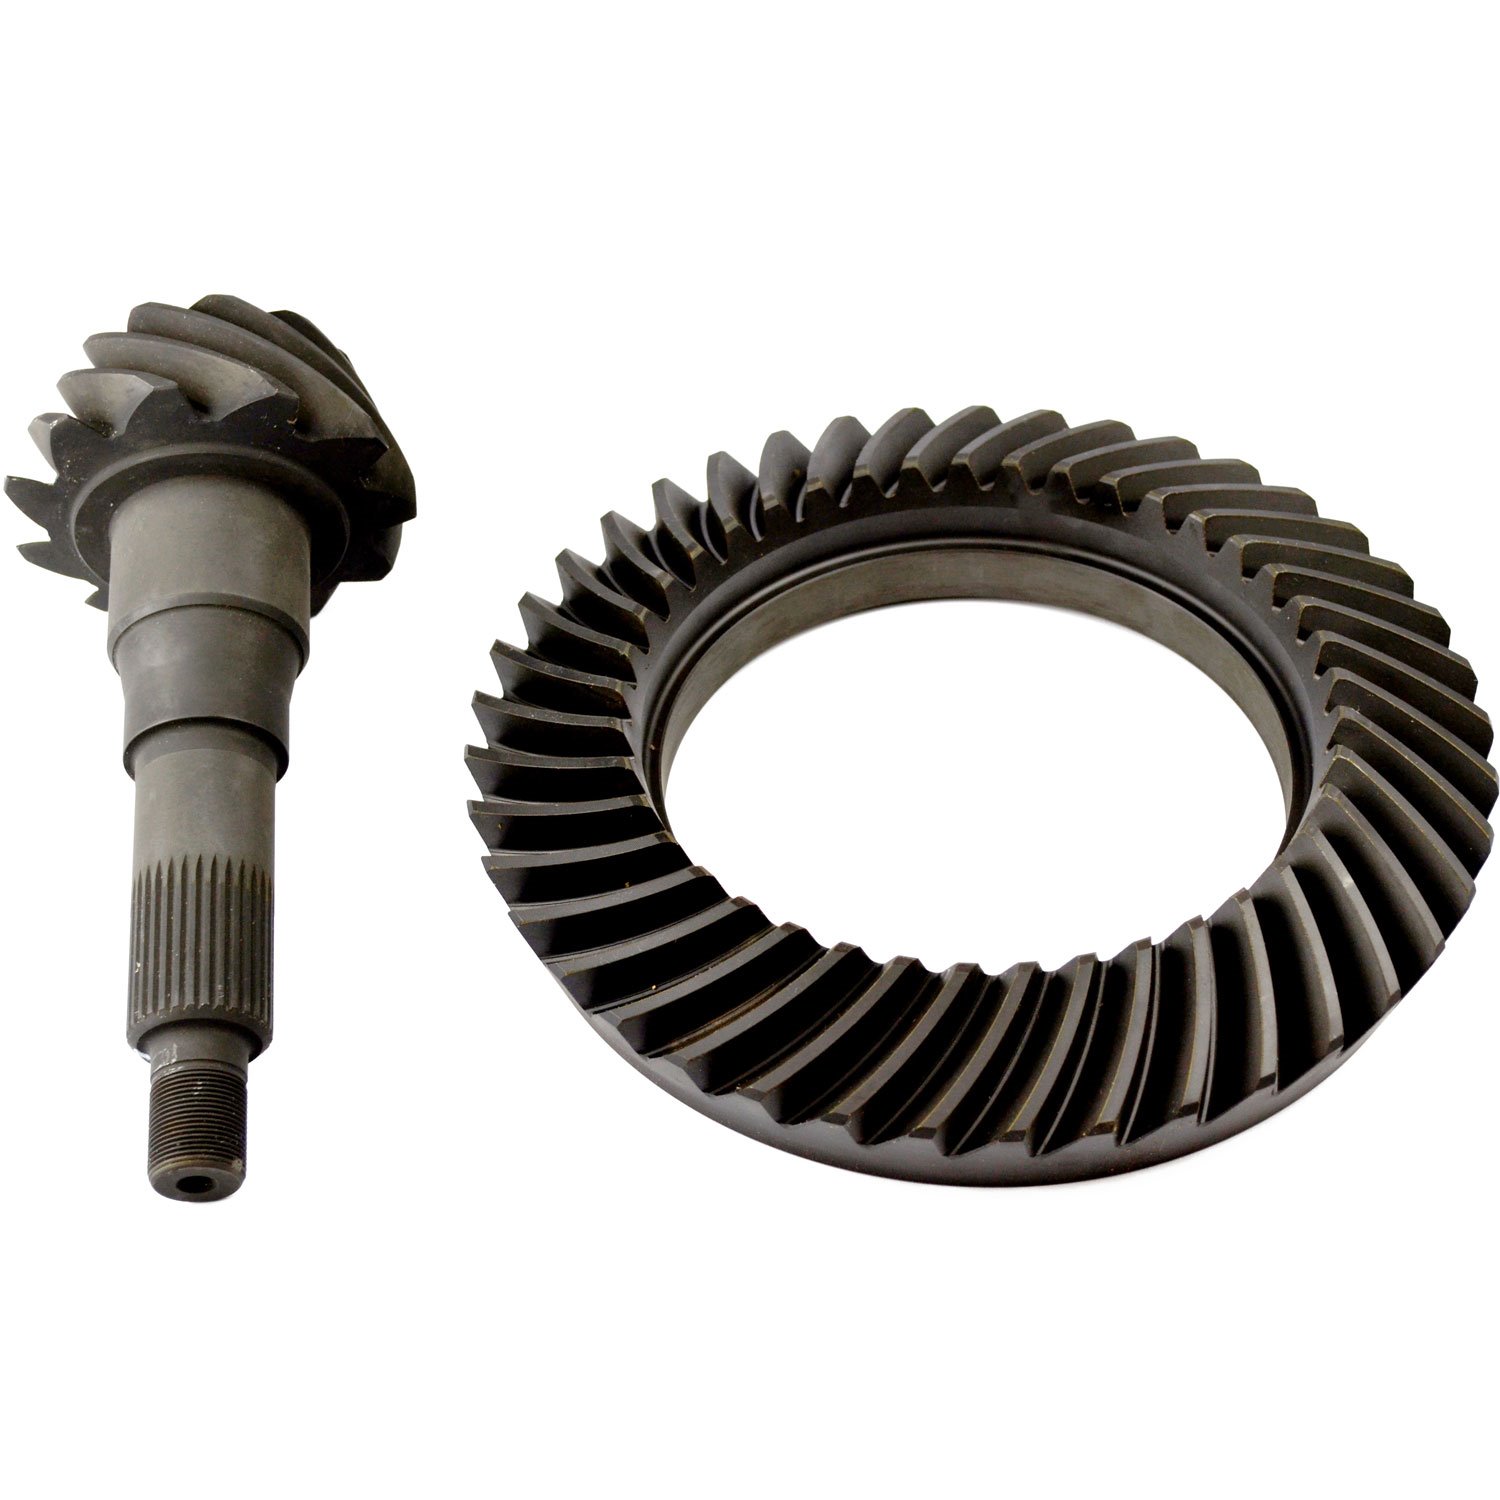 SVFord 9.75" Ring & Pinion 3.73 Ratio